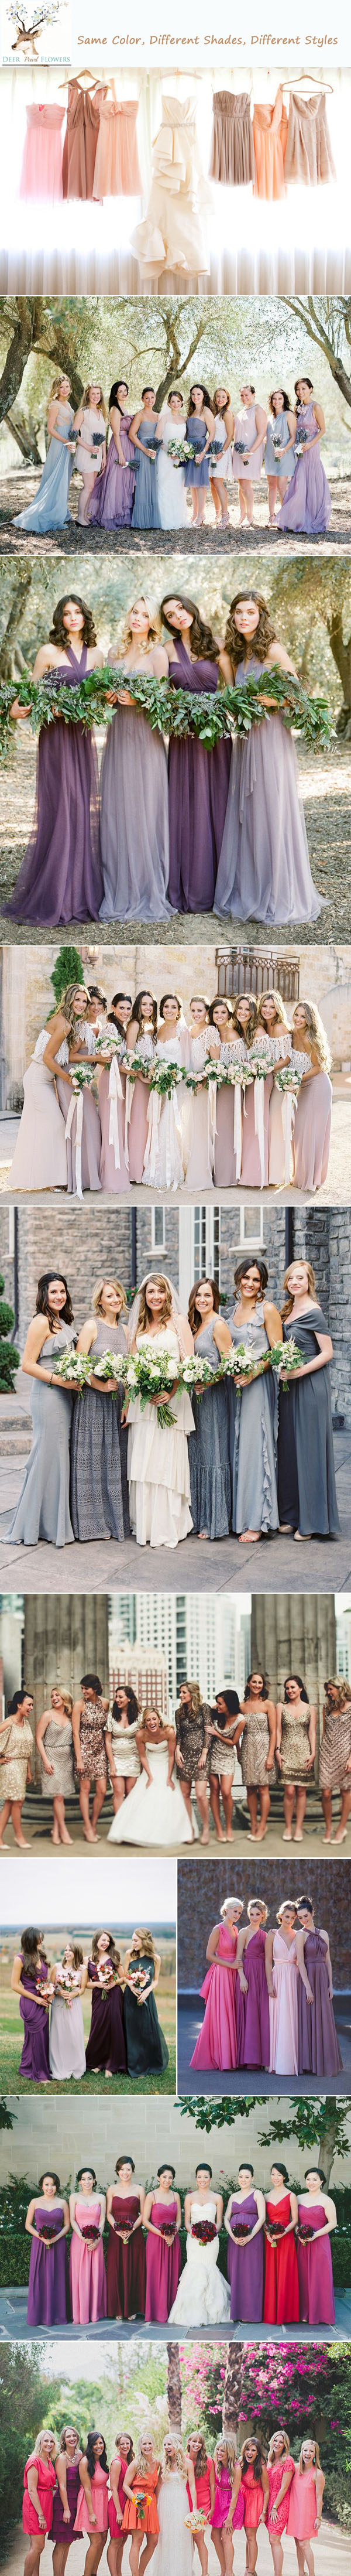 mismatched bridesmaid dresses ideas-same color-different shades styles